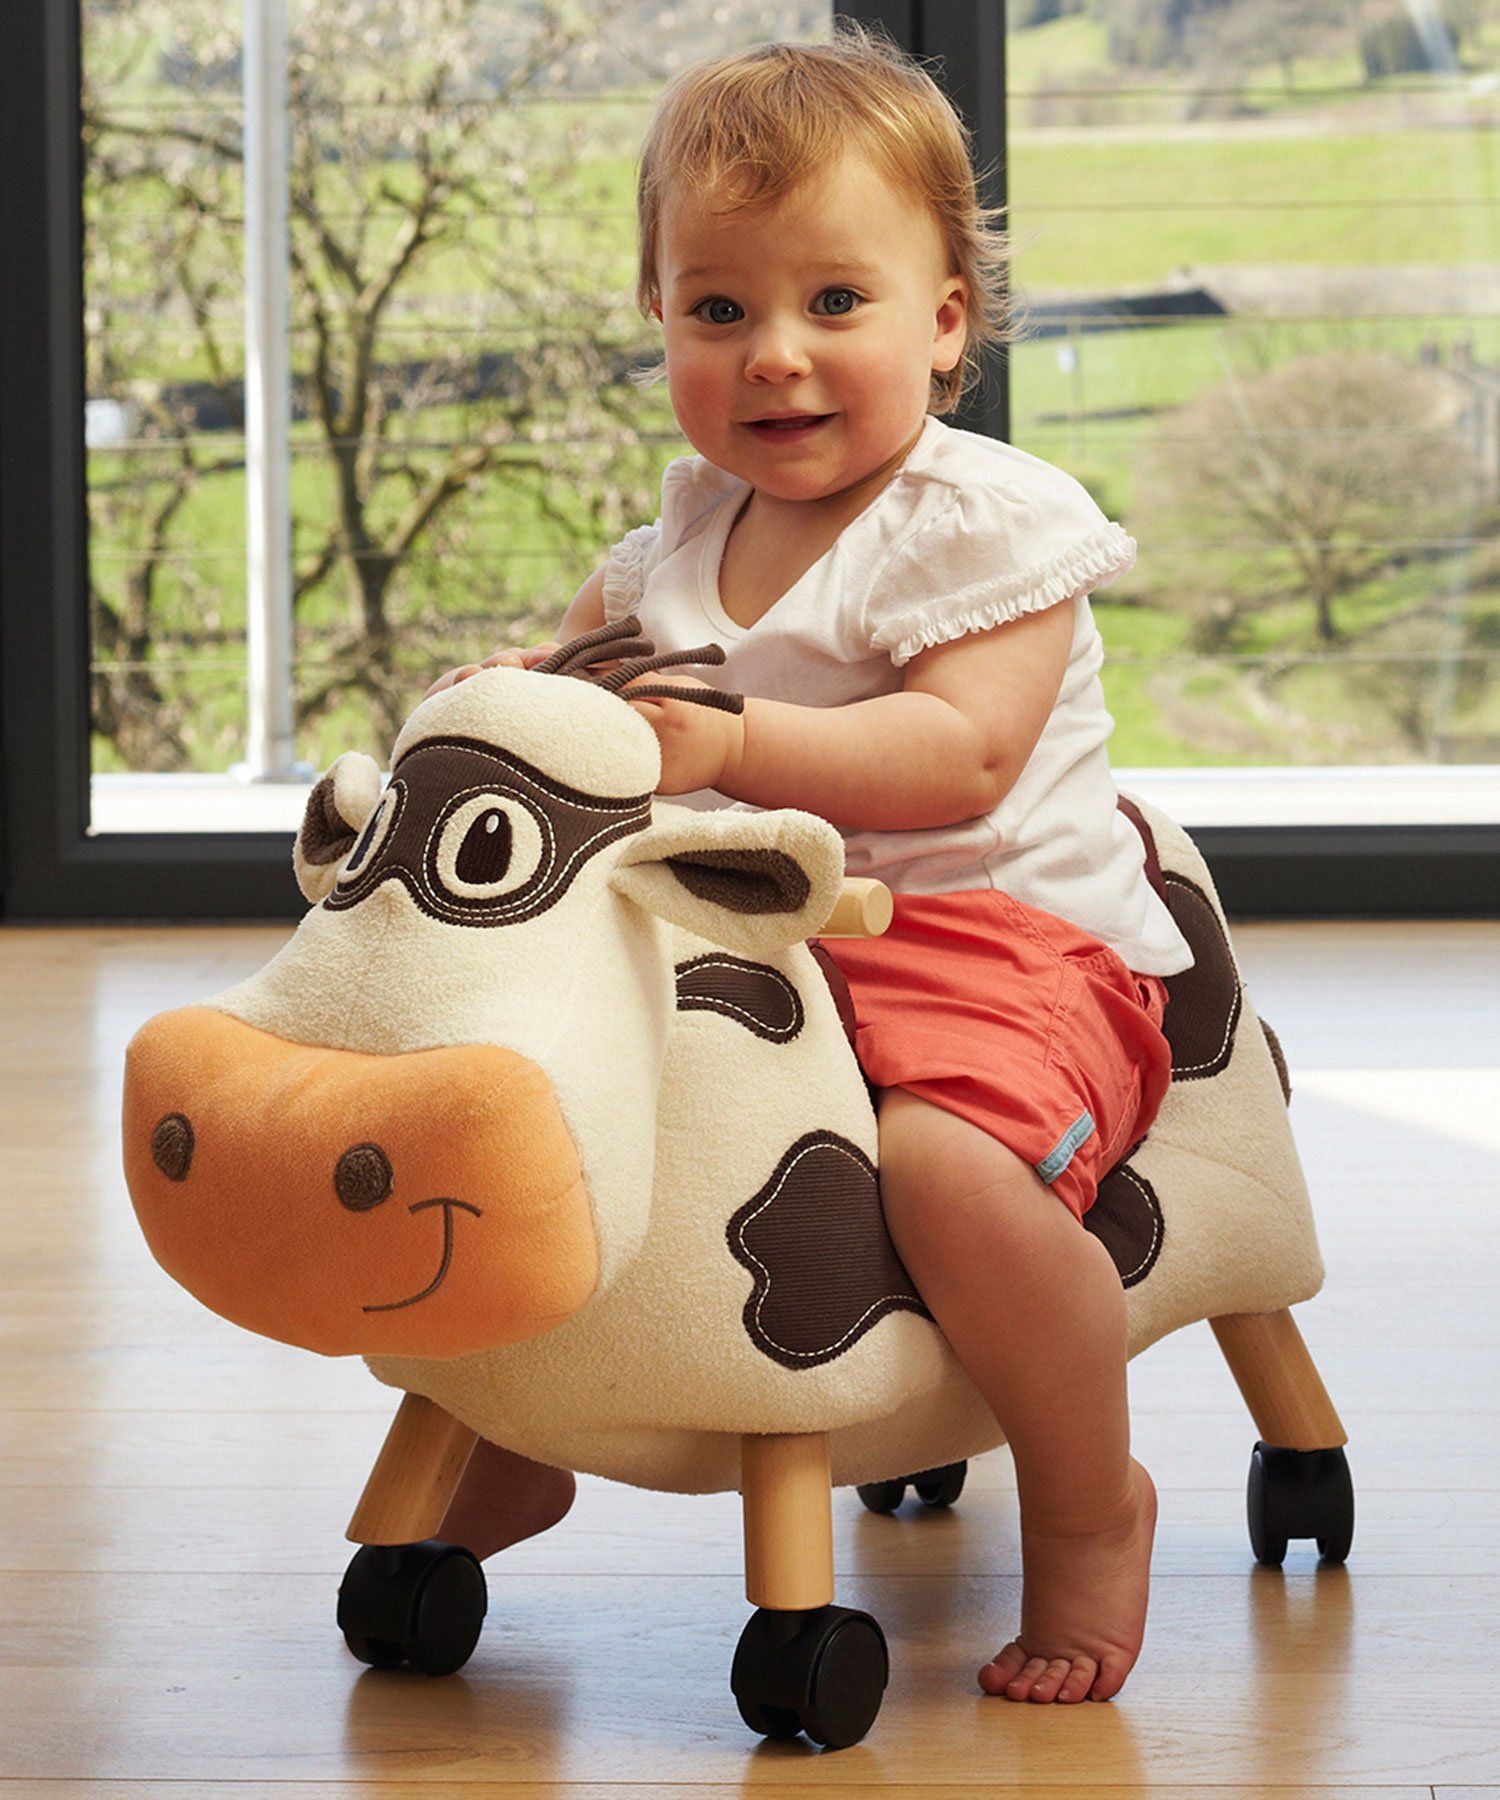 Rocking Horse - Moobert Ride On Cow By Little Bird Told Me